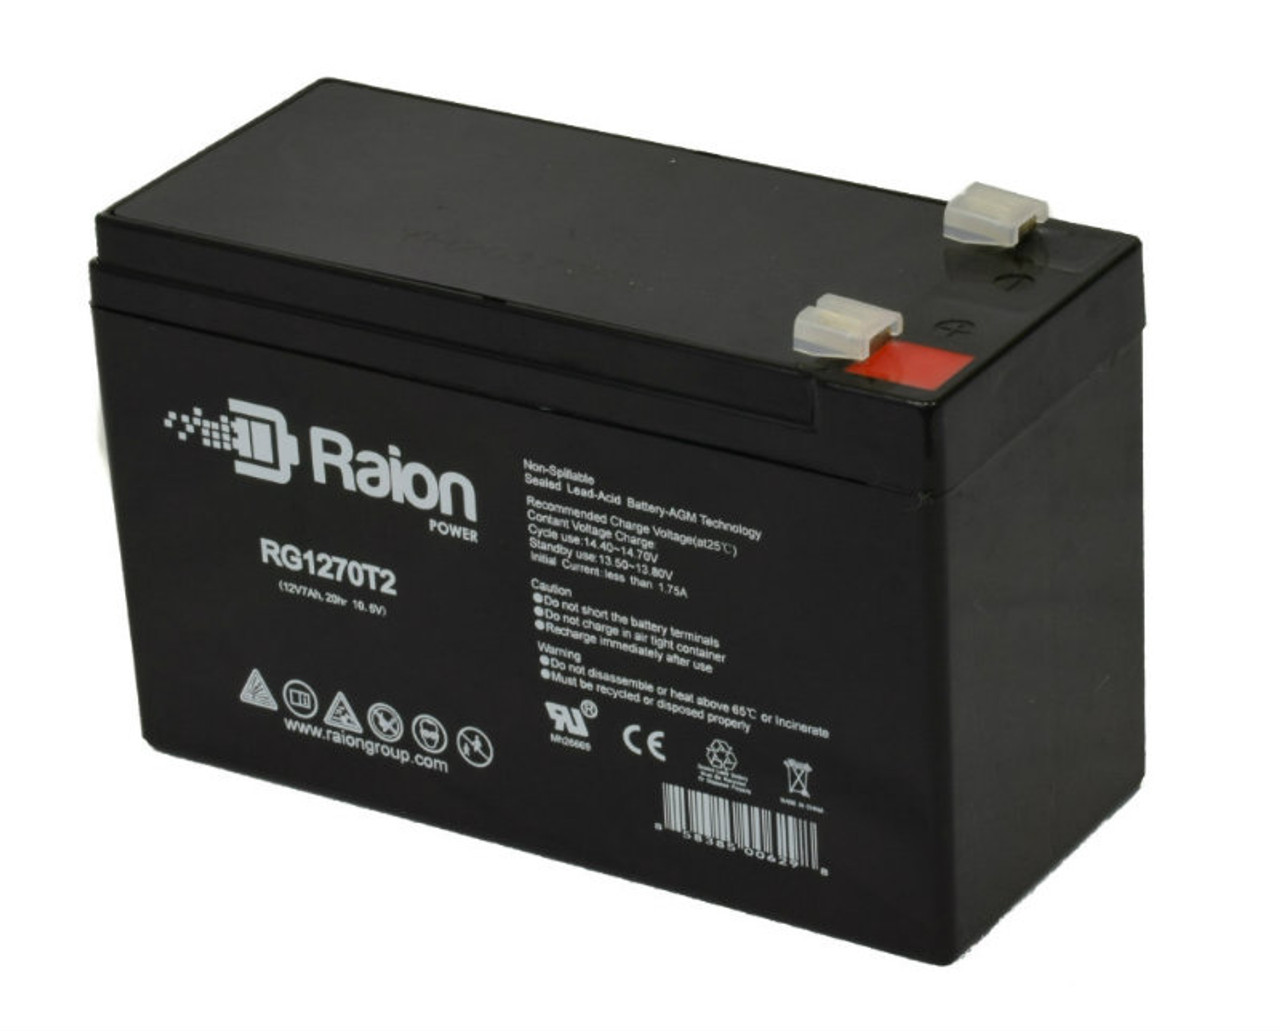 Raion Power RG1270T1 12V 7Ah Non-Spillable Replacement Battery for R&D 5505